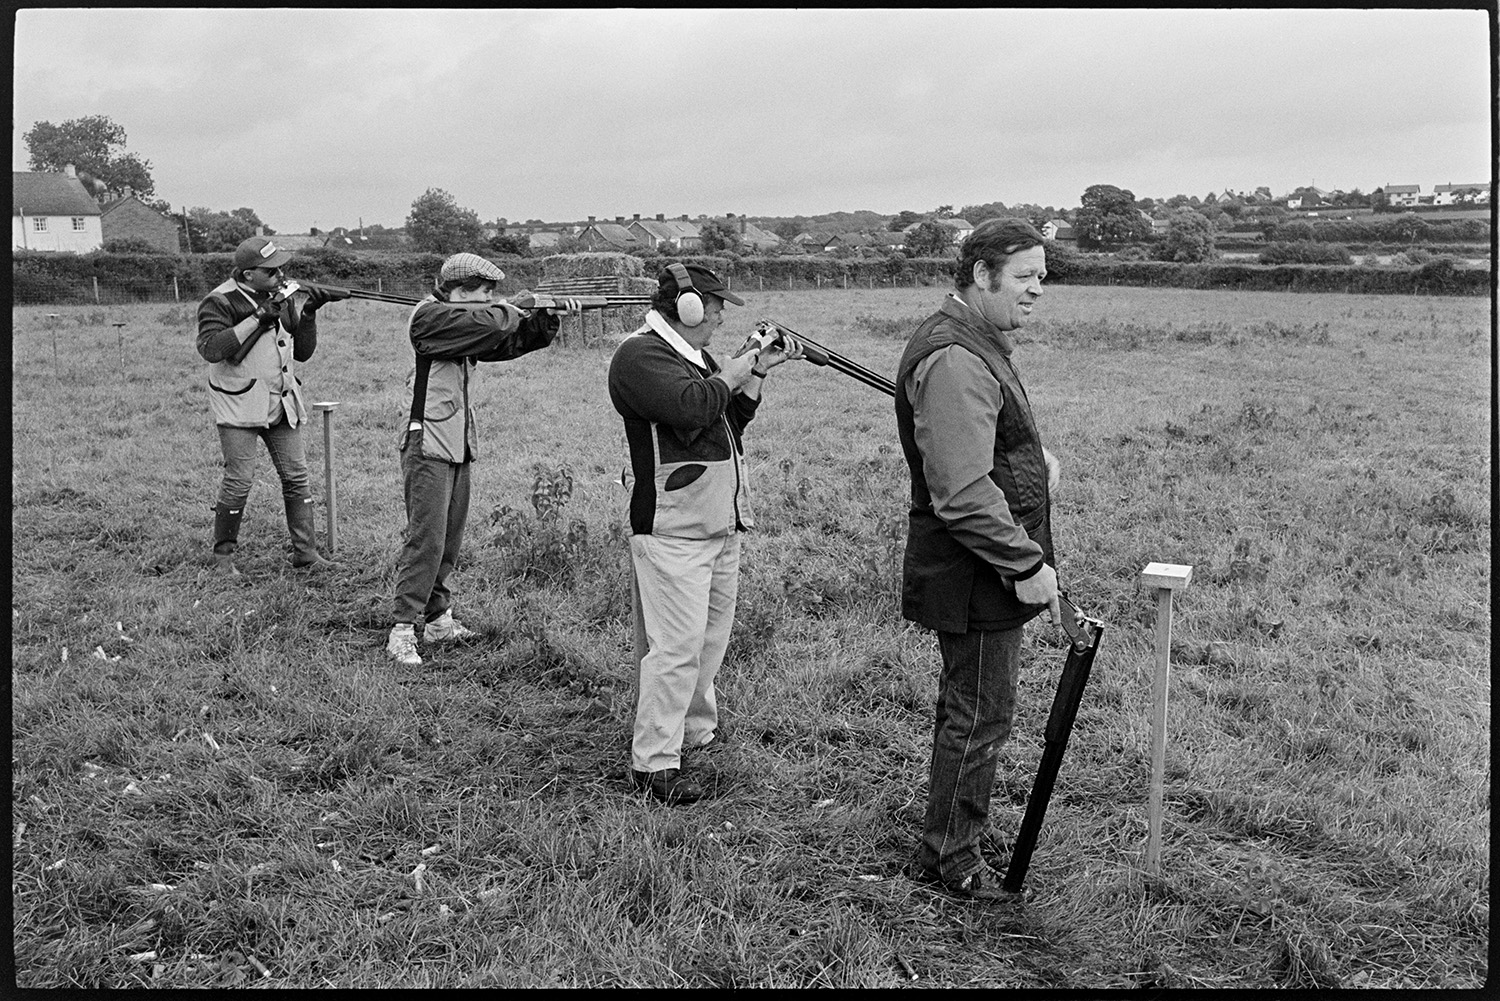 Village Club Day, sports, teas, clay pigeon shoot, committee in discussion.
[A clay pigeon shoot in a field at the Village Club Day in Chawleigh. Three men are taking aim with their guns while another man is standing by the post in the foreground. There are fields and village houses in the background.]